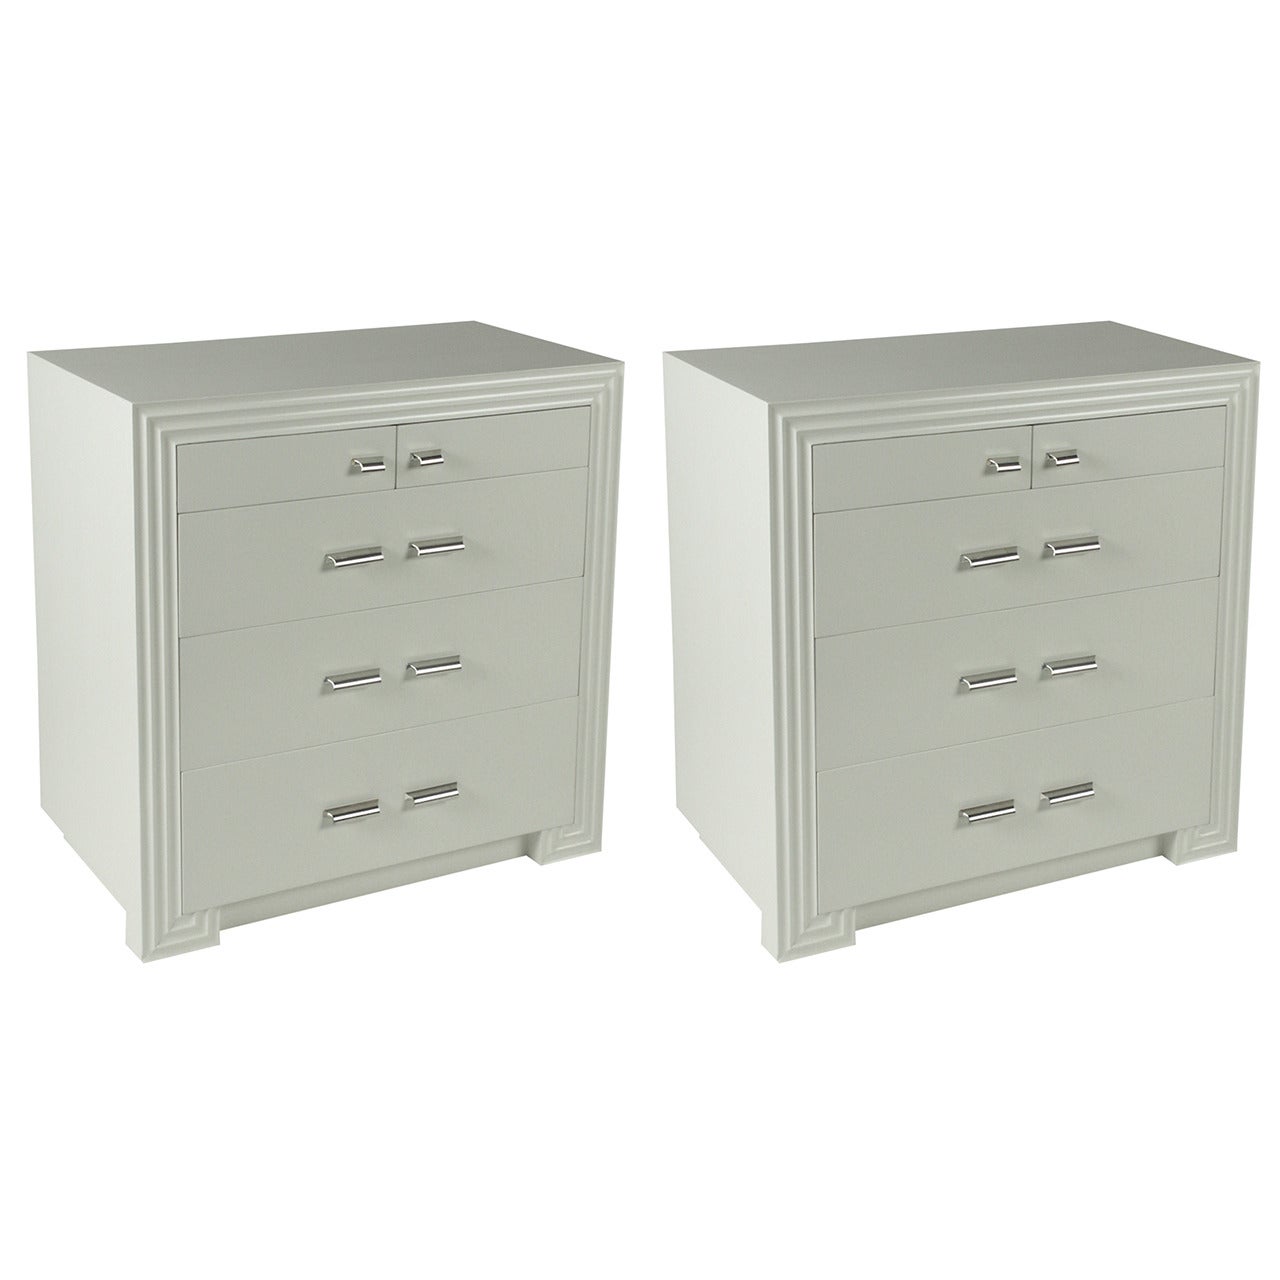 Pair of classical modern matching chests designed by St. Louis Modernist Architect Meyer H. Loomstein and built by his furniture studio Guild Craftsmen in the 1940s. Shown in white lacquer, outer frame has fluted border, similar to a Greek key form